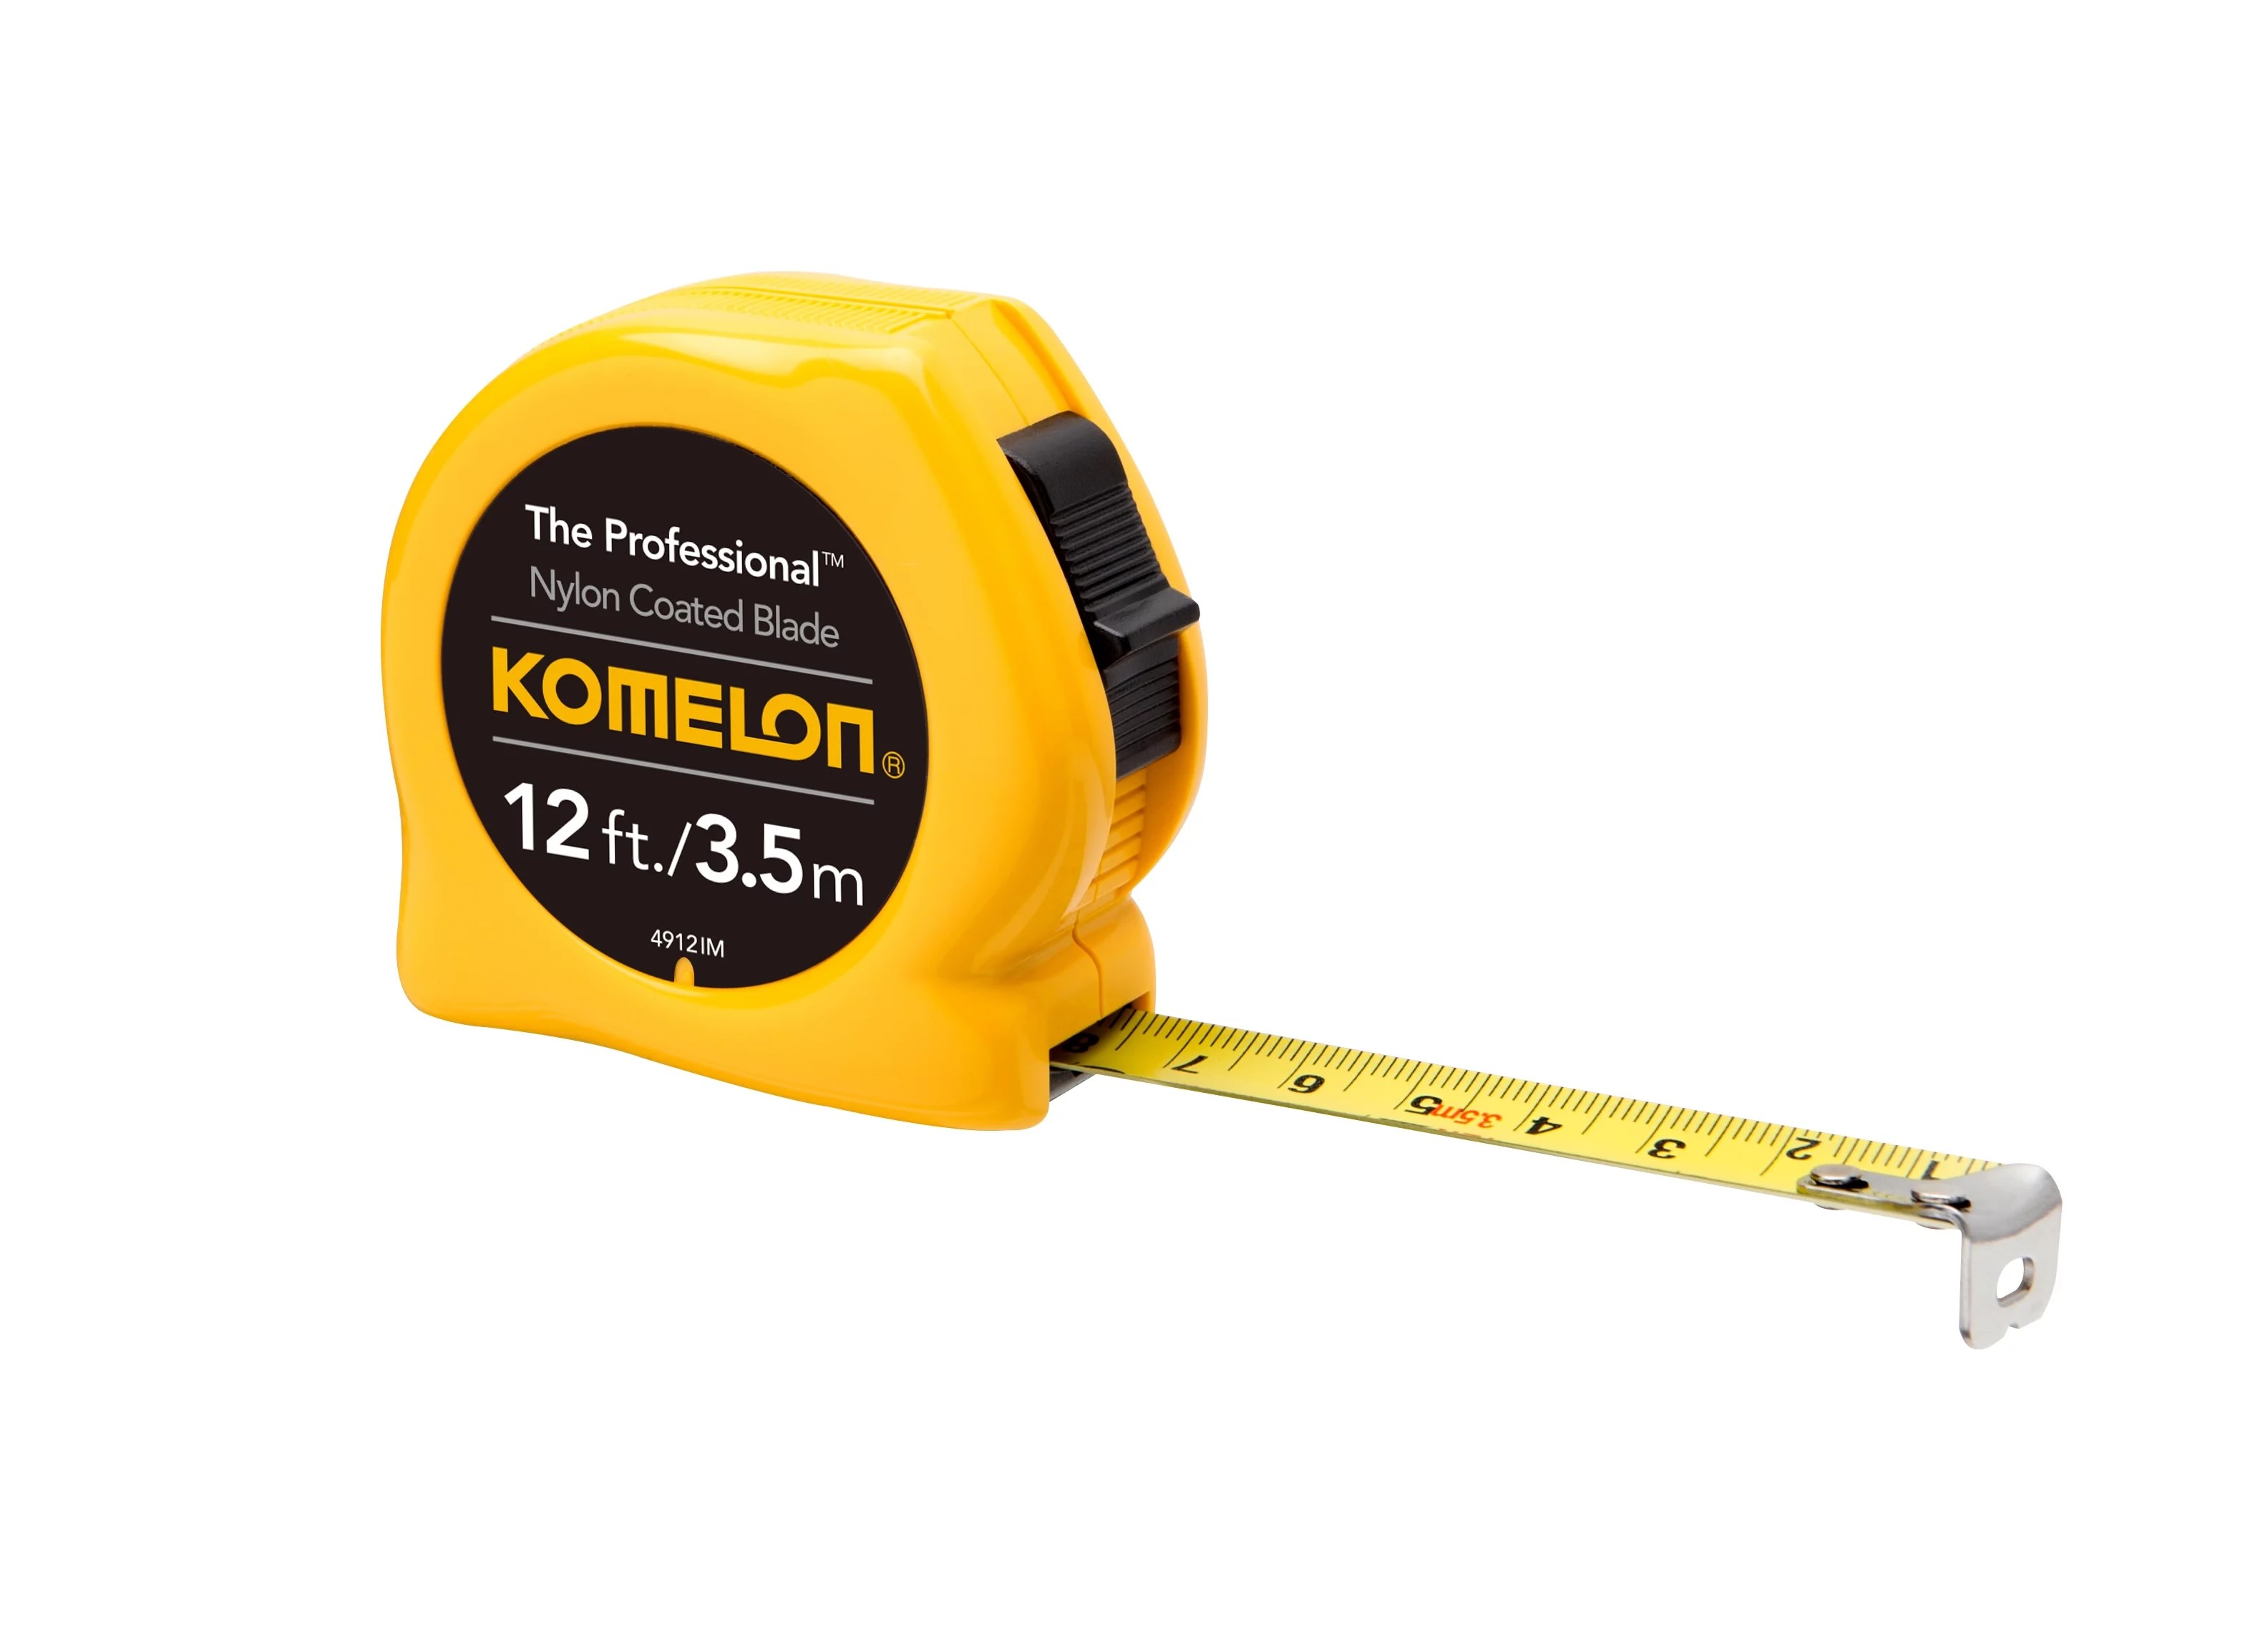 Lichamp Tape Measure 16 ft, 6 Pack Bulk Easy Read Measuring Tape Retractable with Fractions 1/8, Measurement Tape 16-Foot by 3/4-Inch